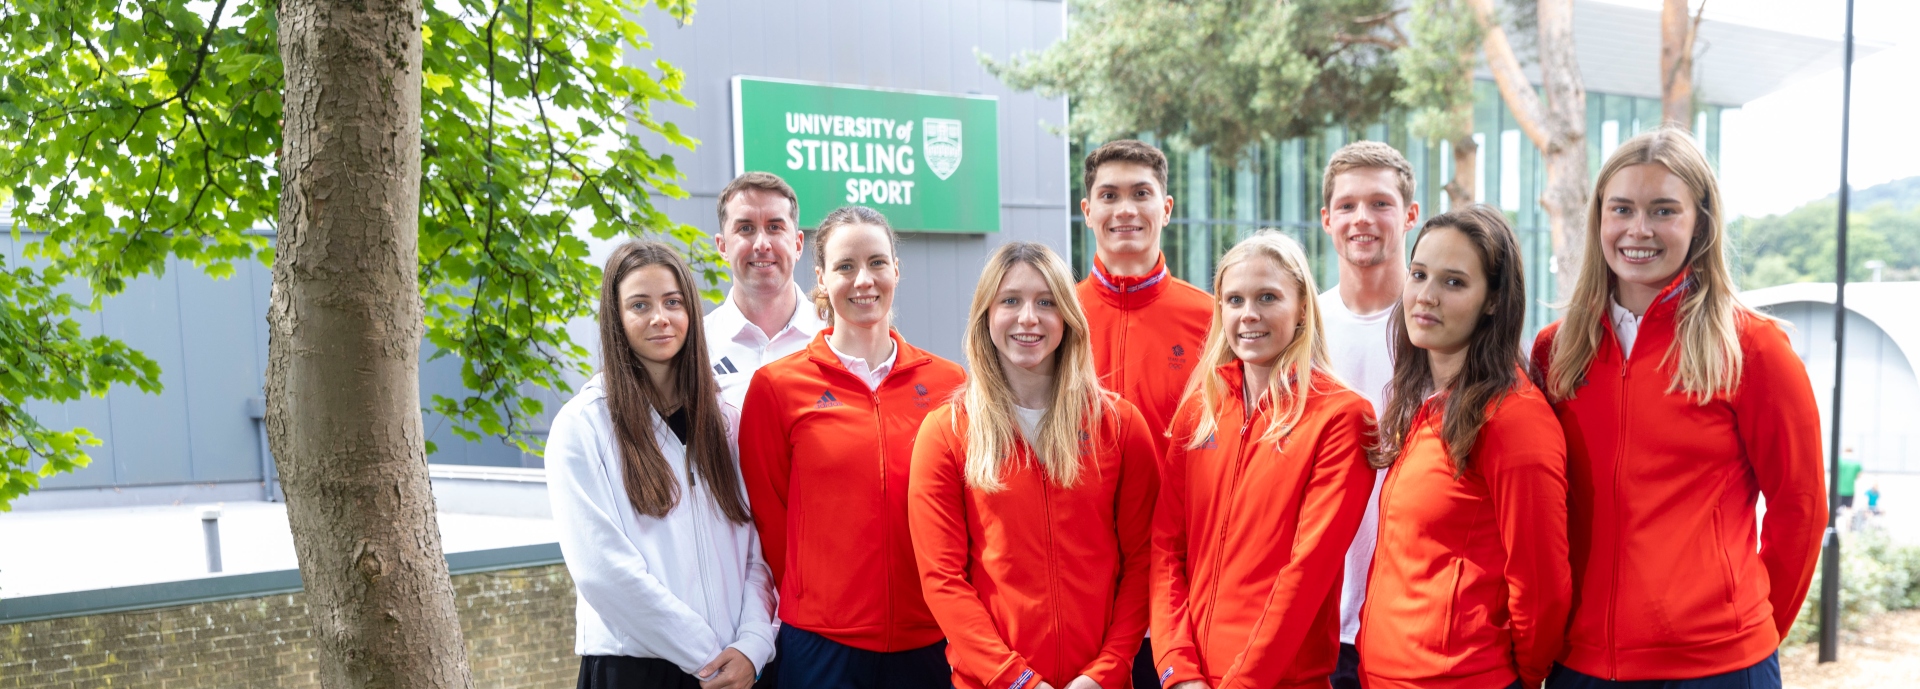 Stirling's eight Olympians outside the University of Stirling Sports Centre.